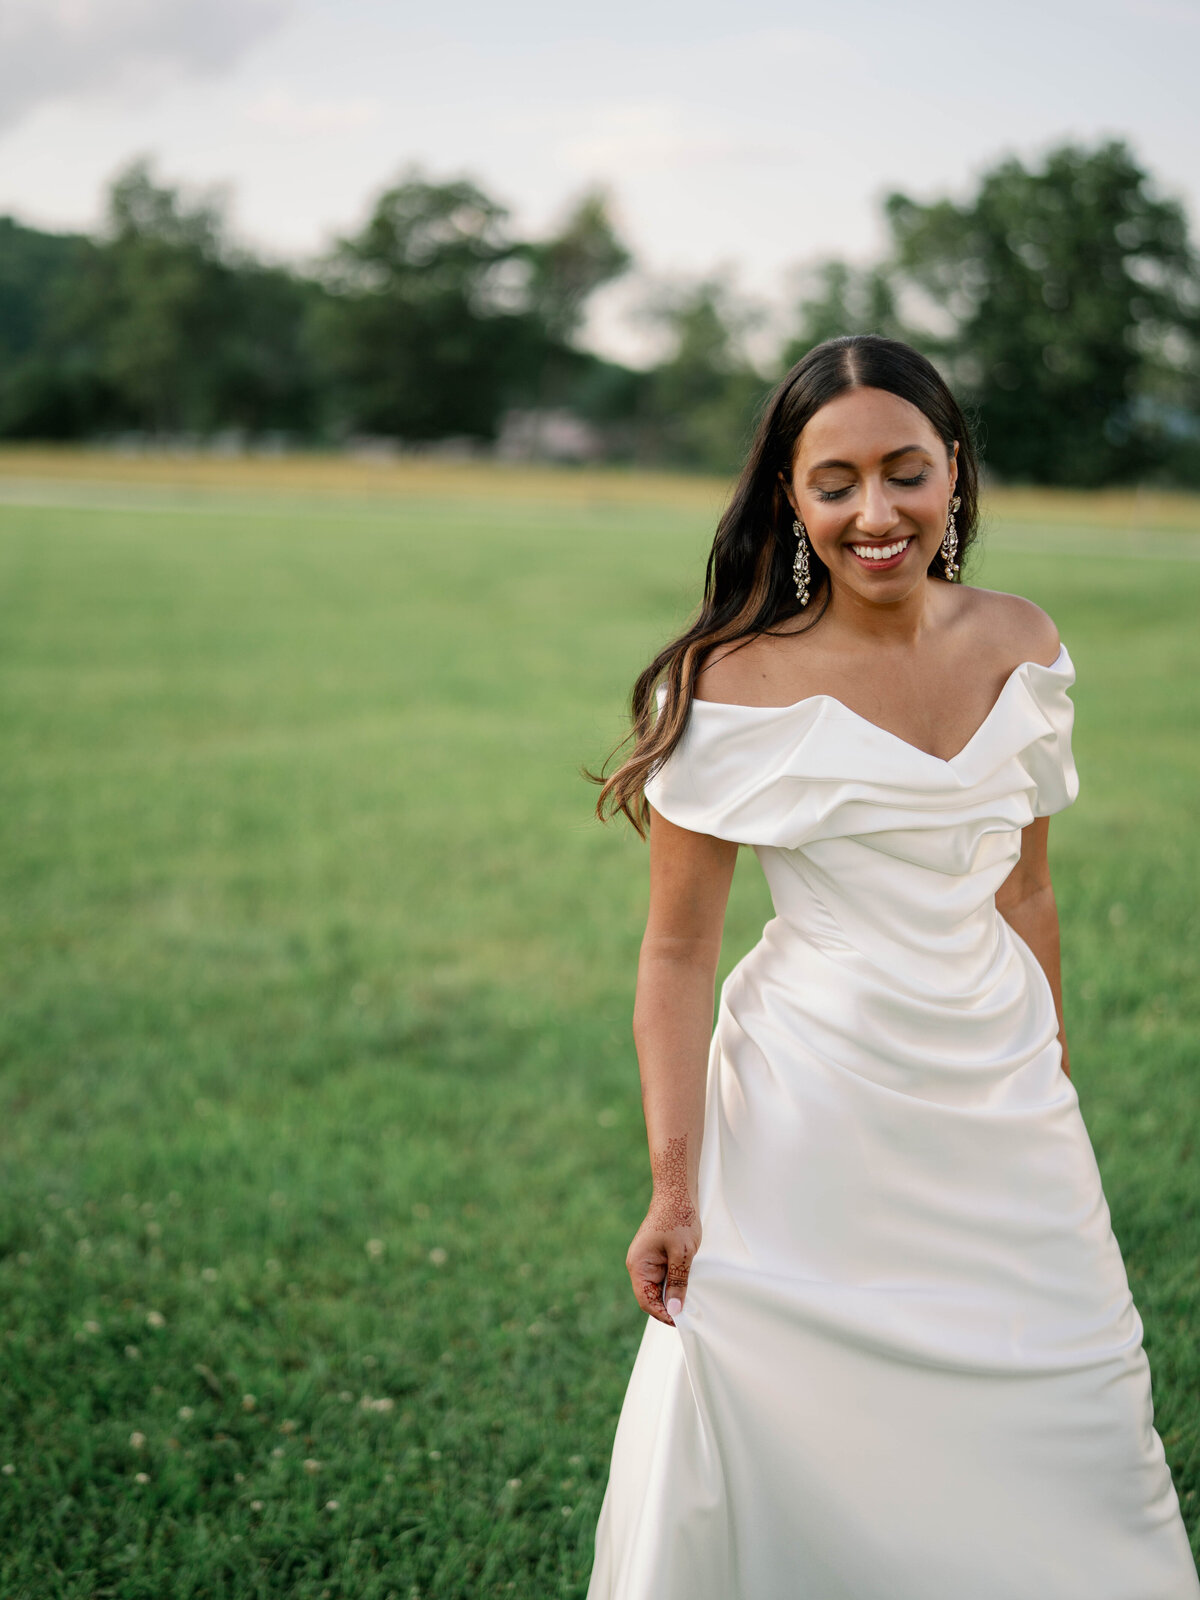 Liz Andolina Photography Destination Wedding Photographer in Italy, New York, Across the East Coast Editorial, heritage-quality images for stylish couples-783